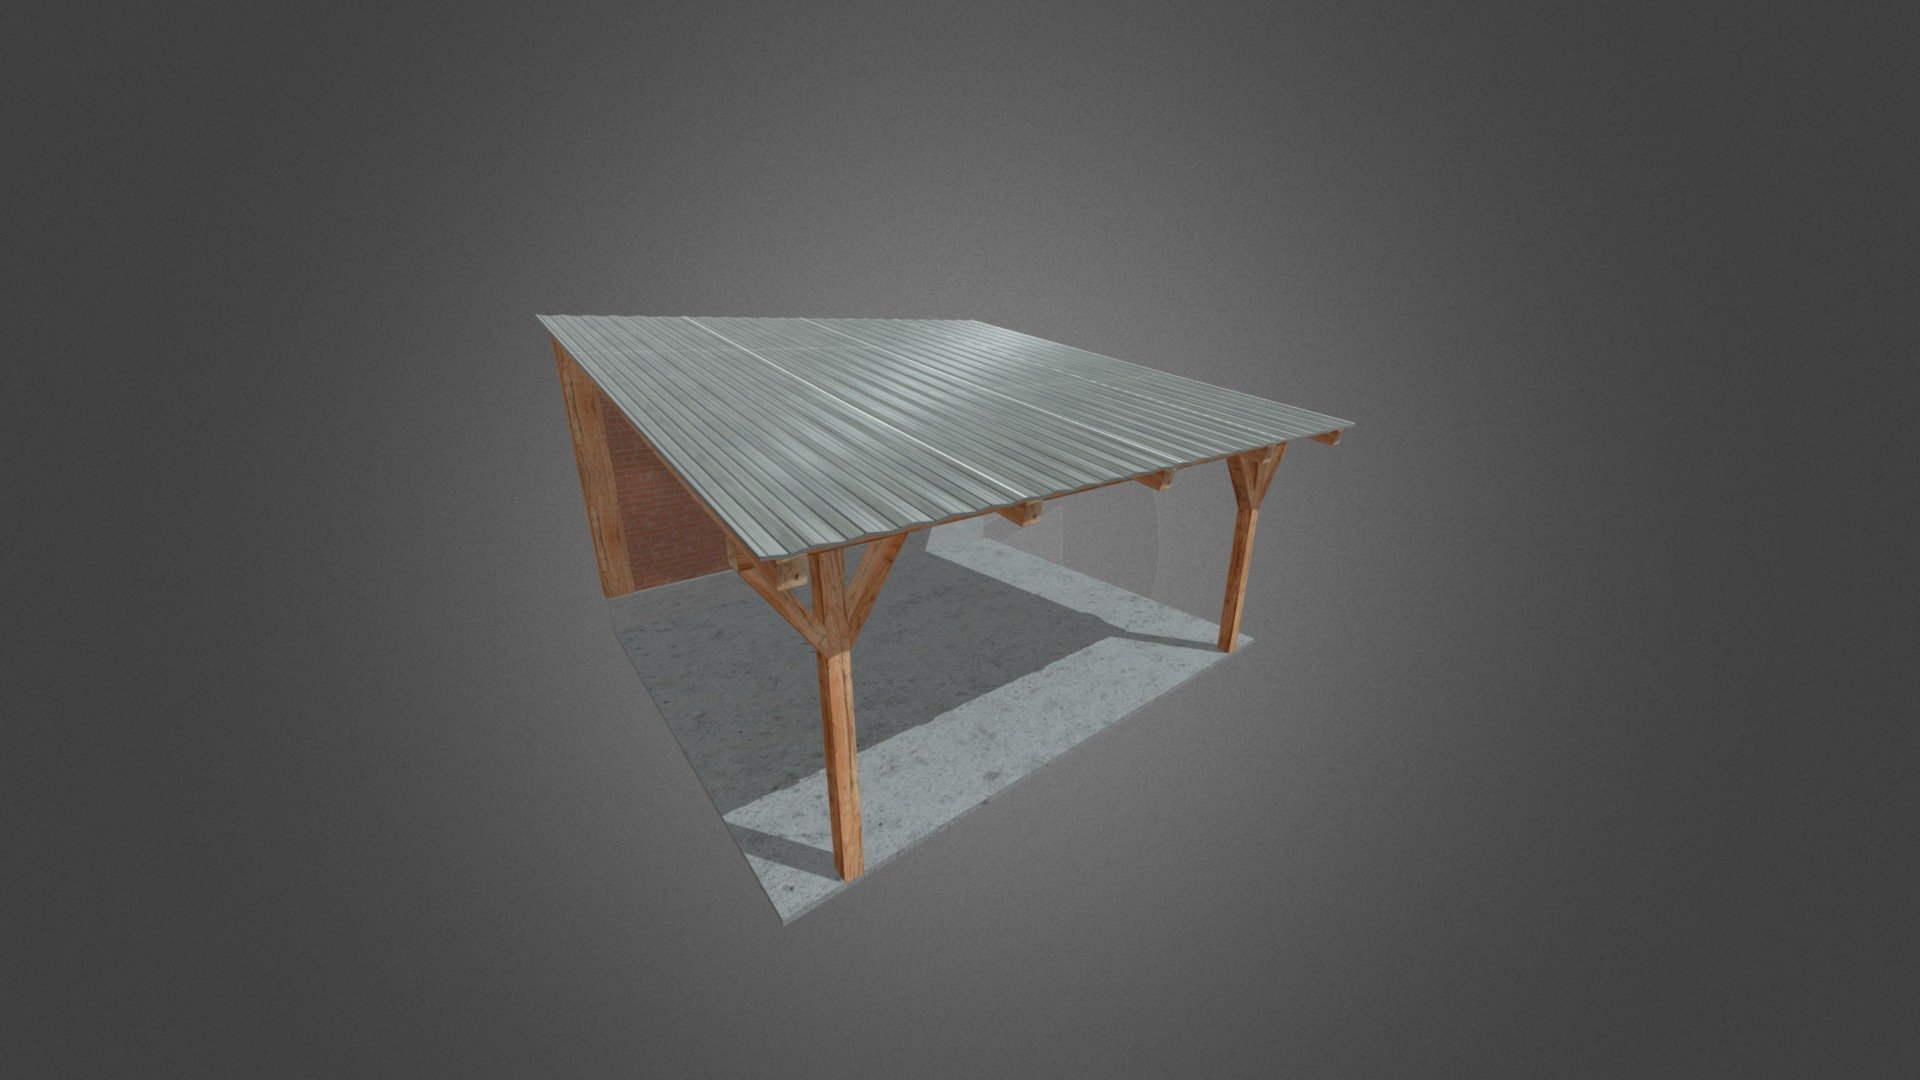 Simple shed I made in blender 2.8
My first model 3d model